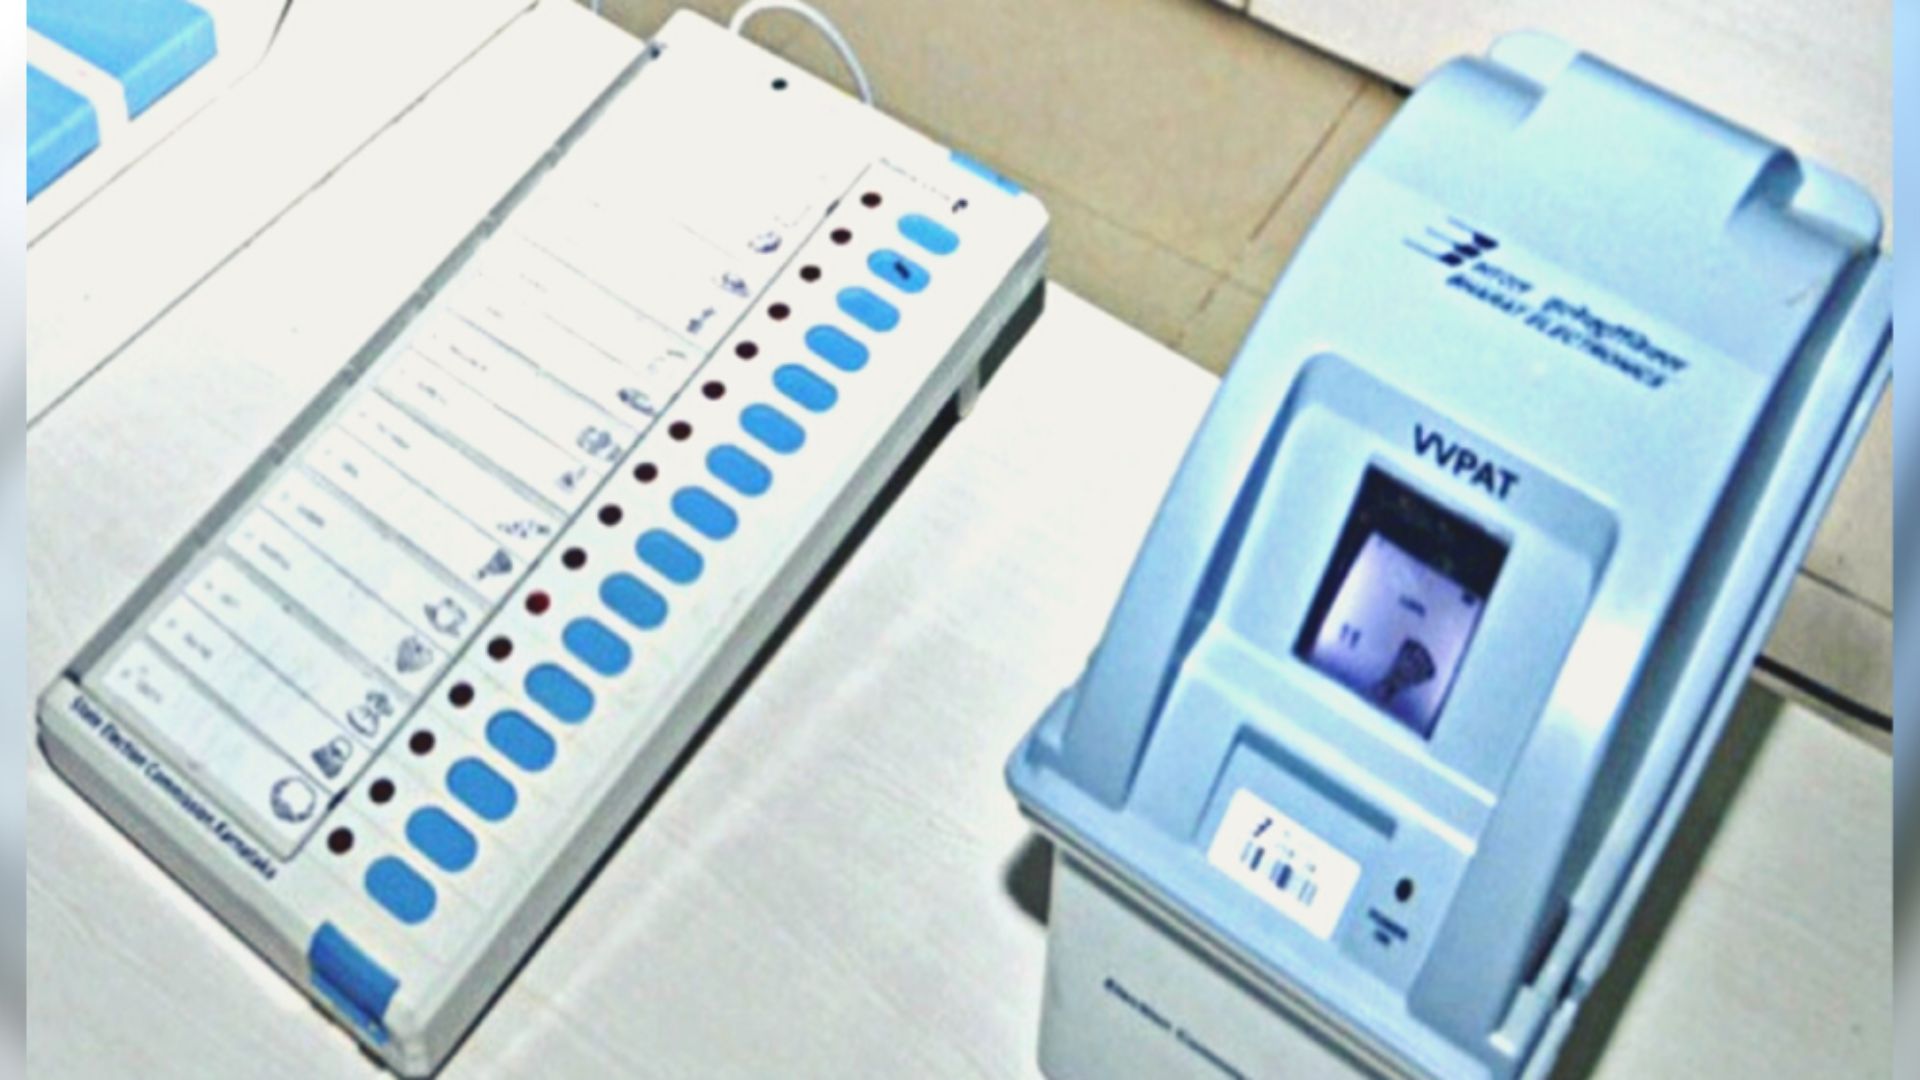 EVM: SC says no orders based on doubts